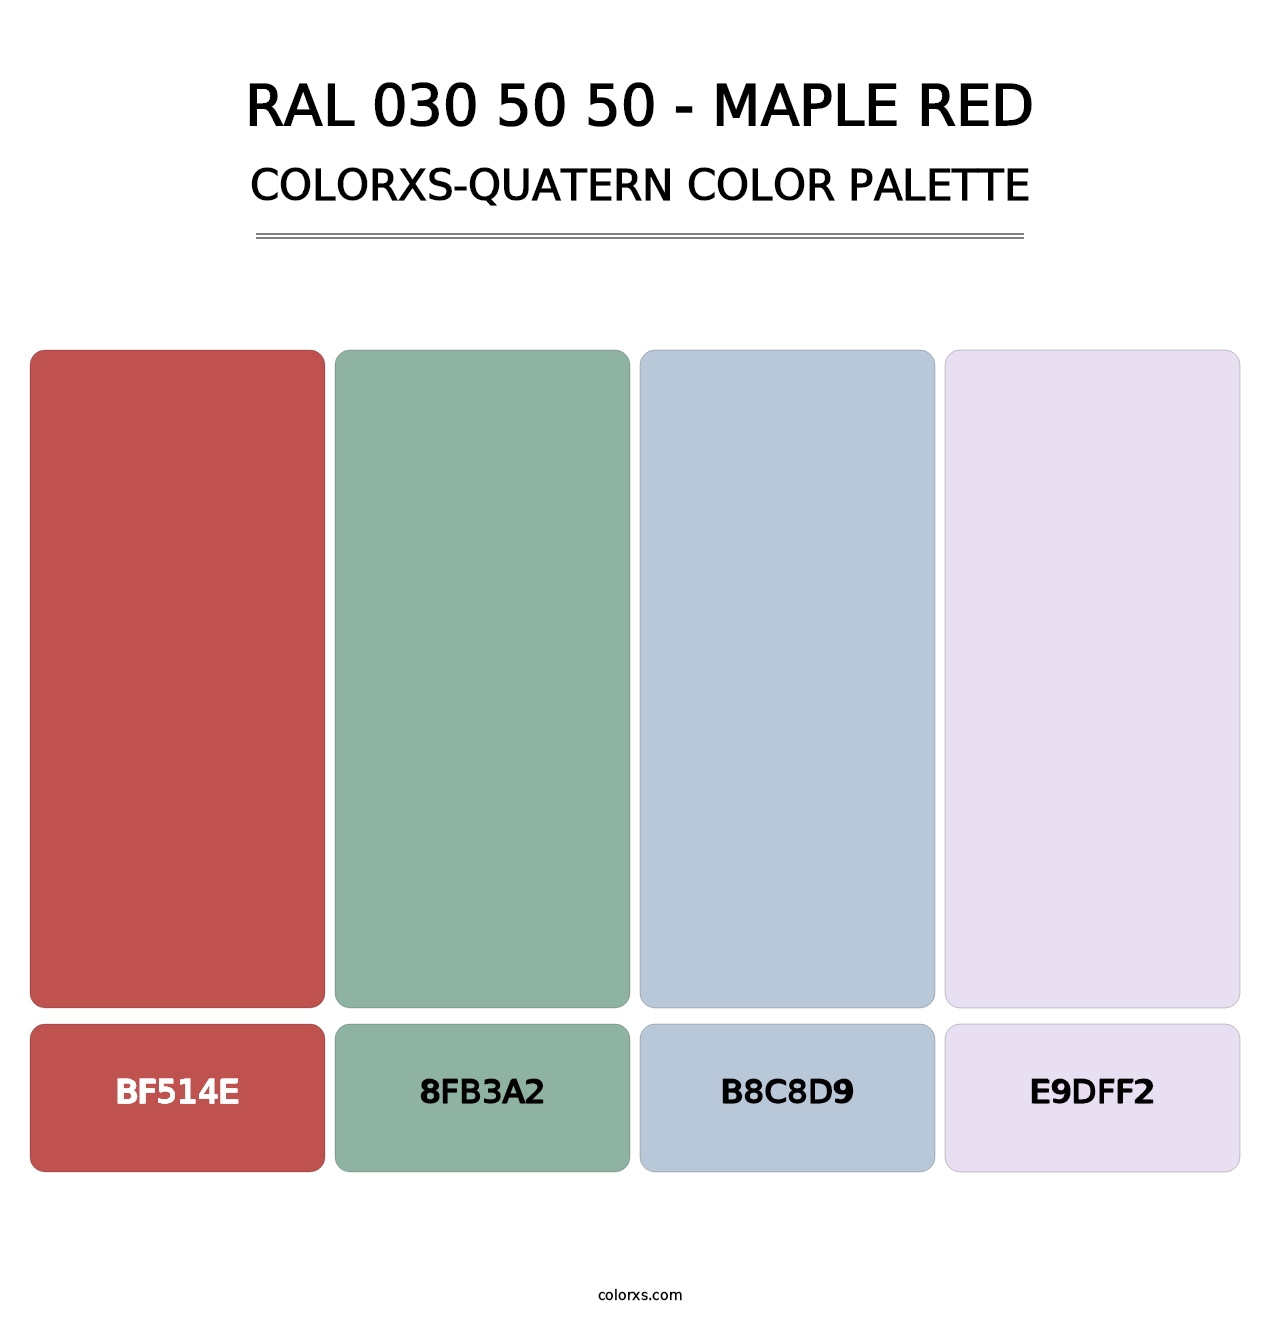 RAL 030 50 50 - Maple Red - Colorxs Quatern Palette